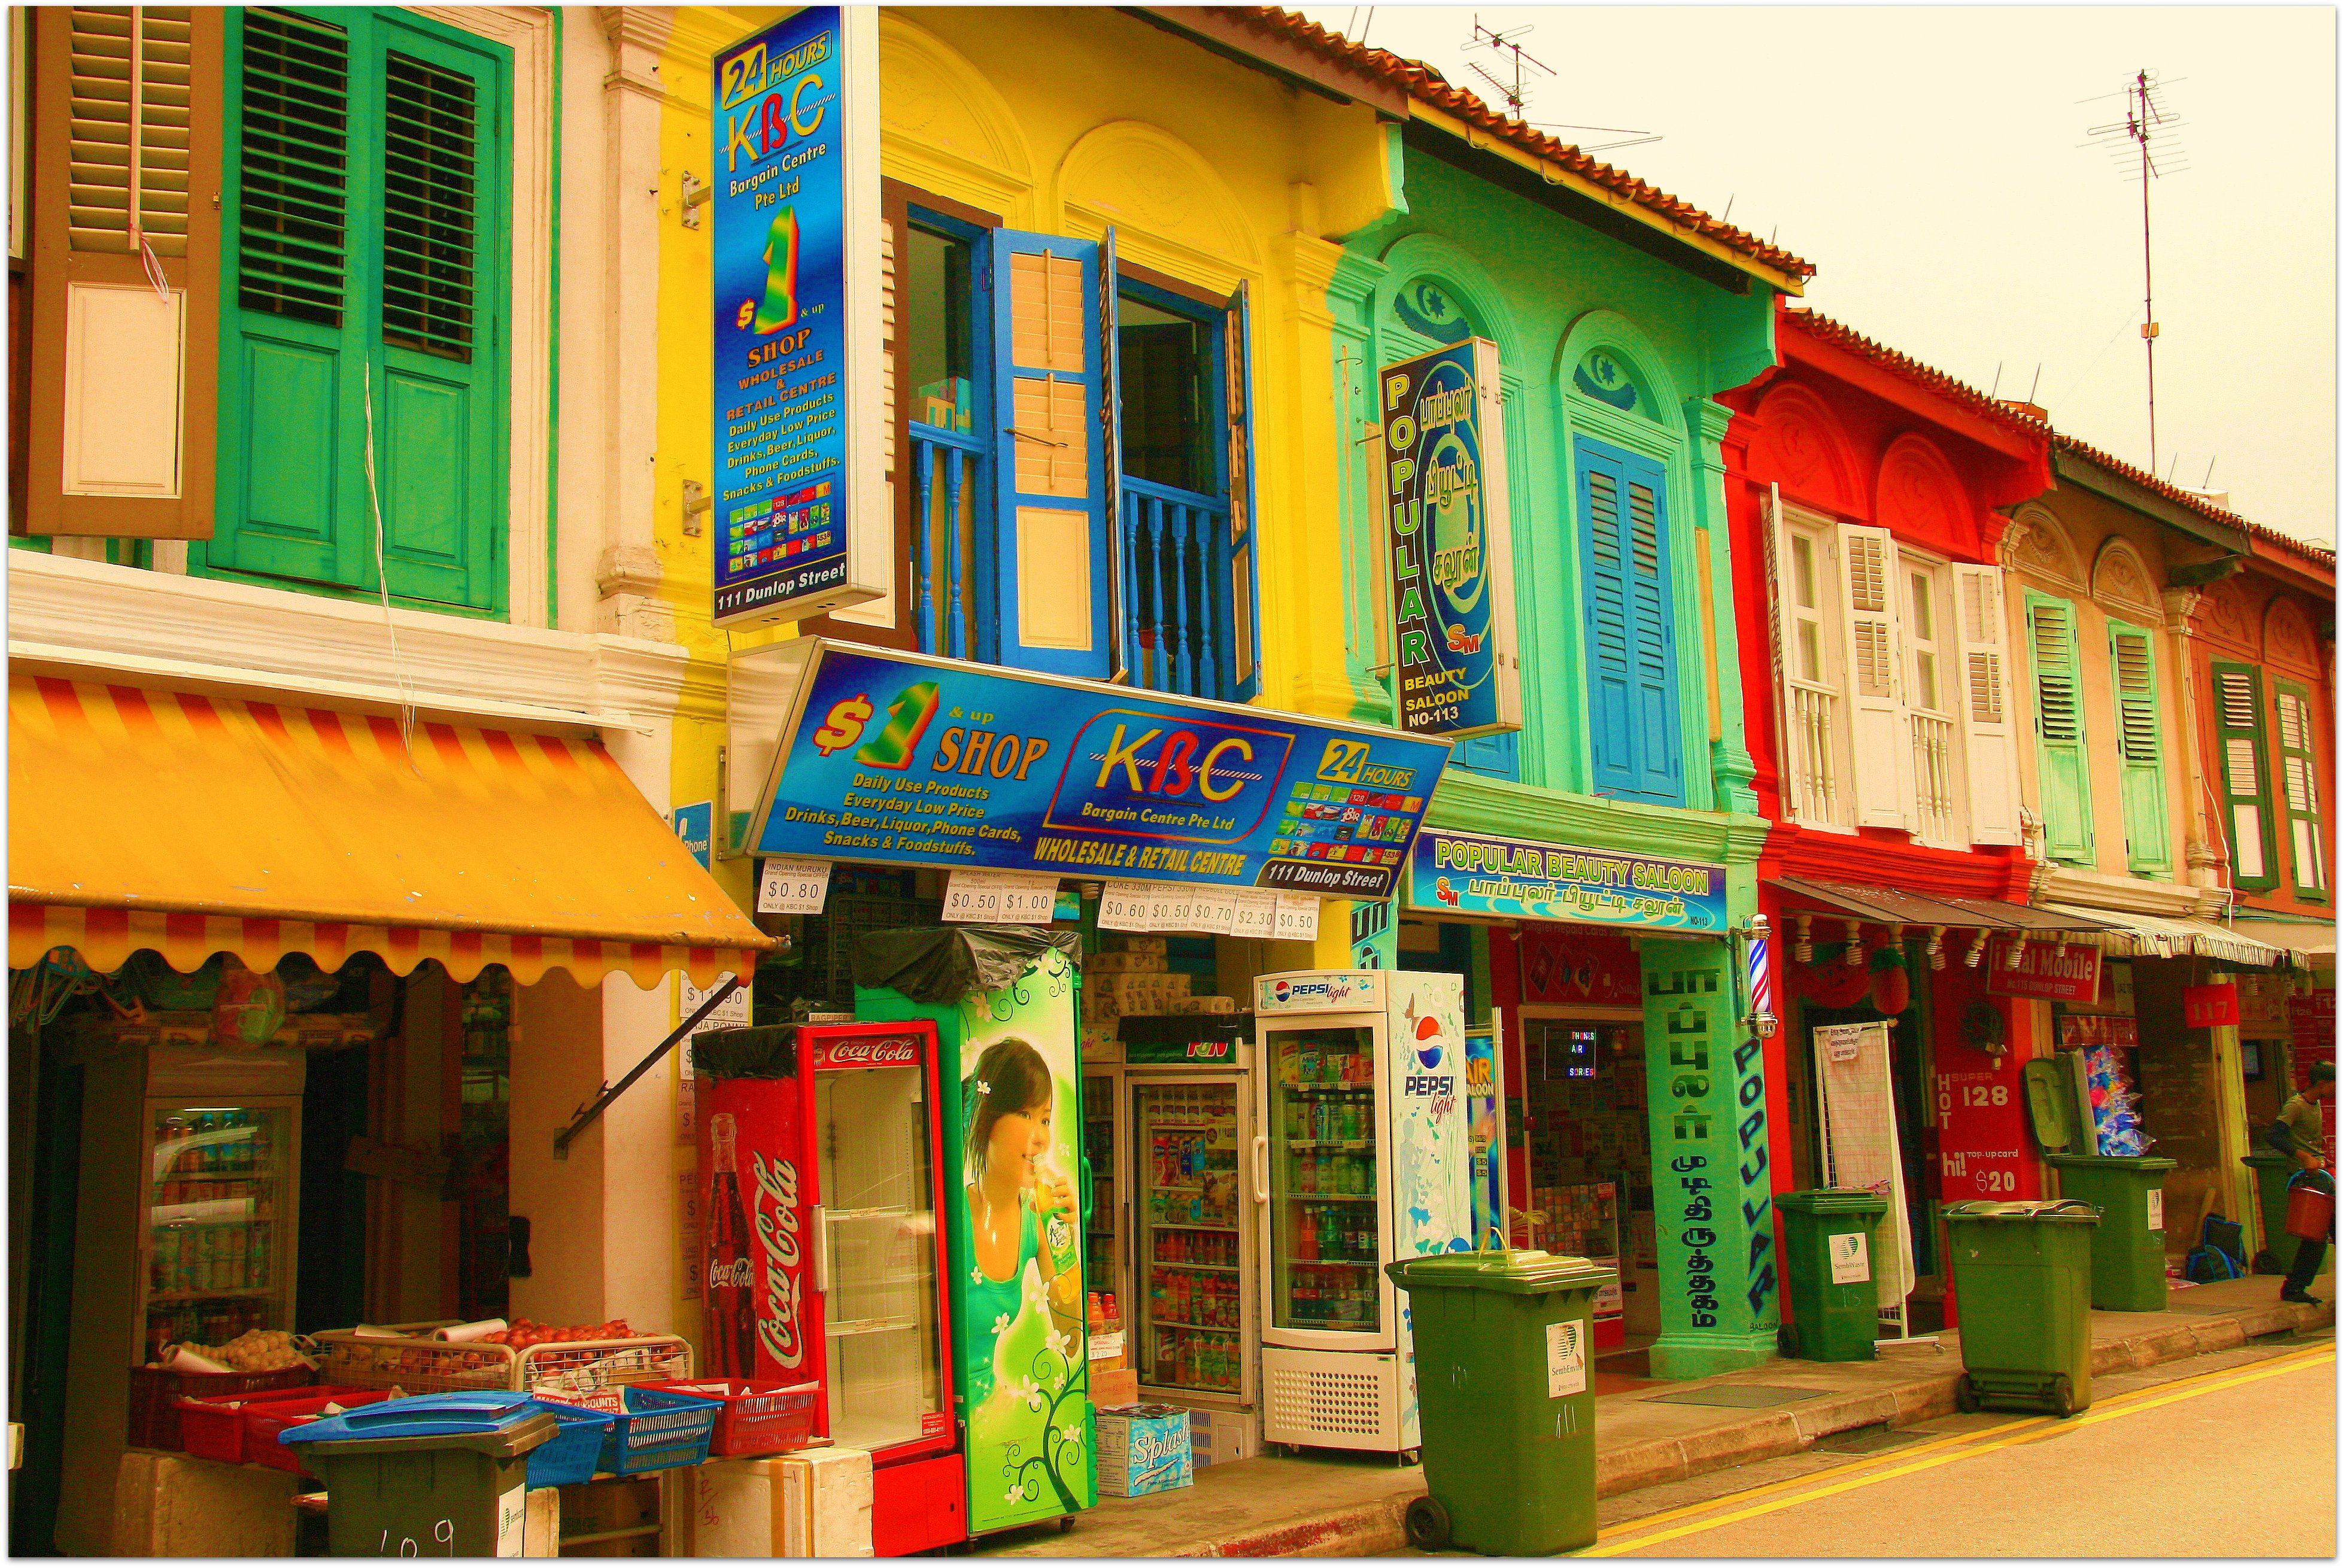 The-Colorful-Streets-of-Little-India-Singapore-carrie-kellenberger1.jpg